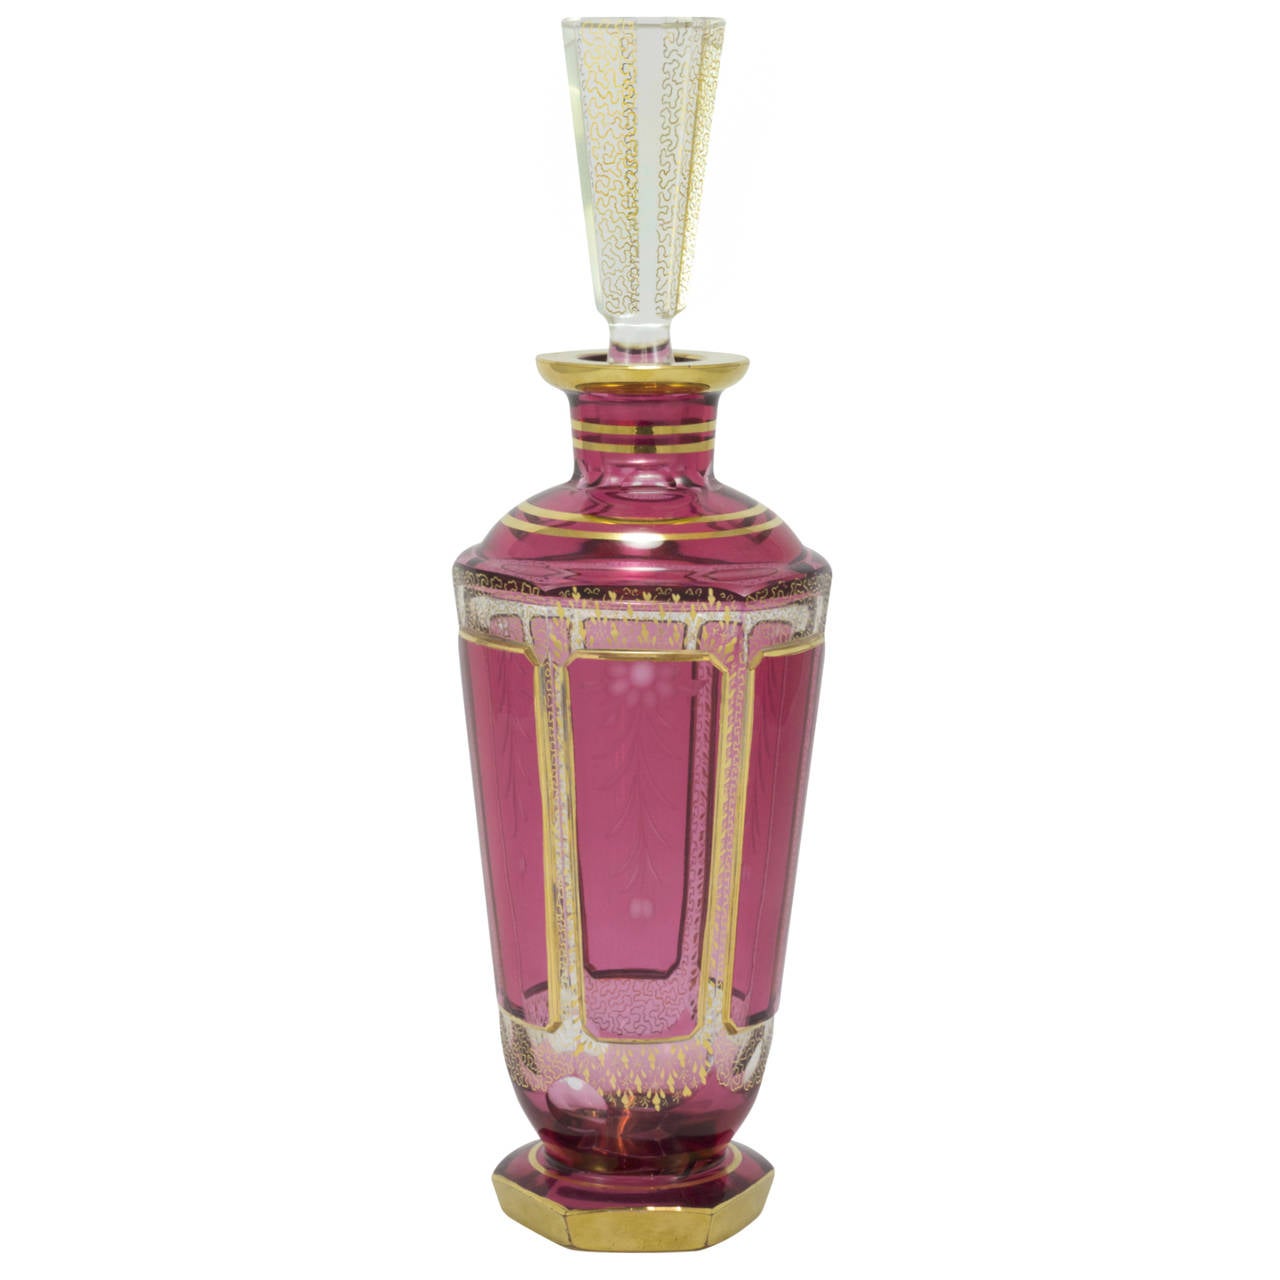 Pair of early 20th century ruby cut to clear bohemian glass decanters with gilt decoration. Each decanter sports individual design features, such as alternating cut panels, and varied gilt banding, to differentiate between spirits. These glass